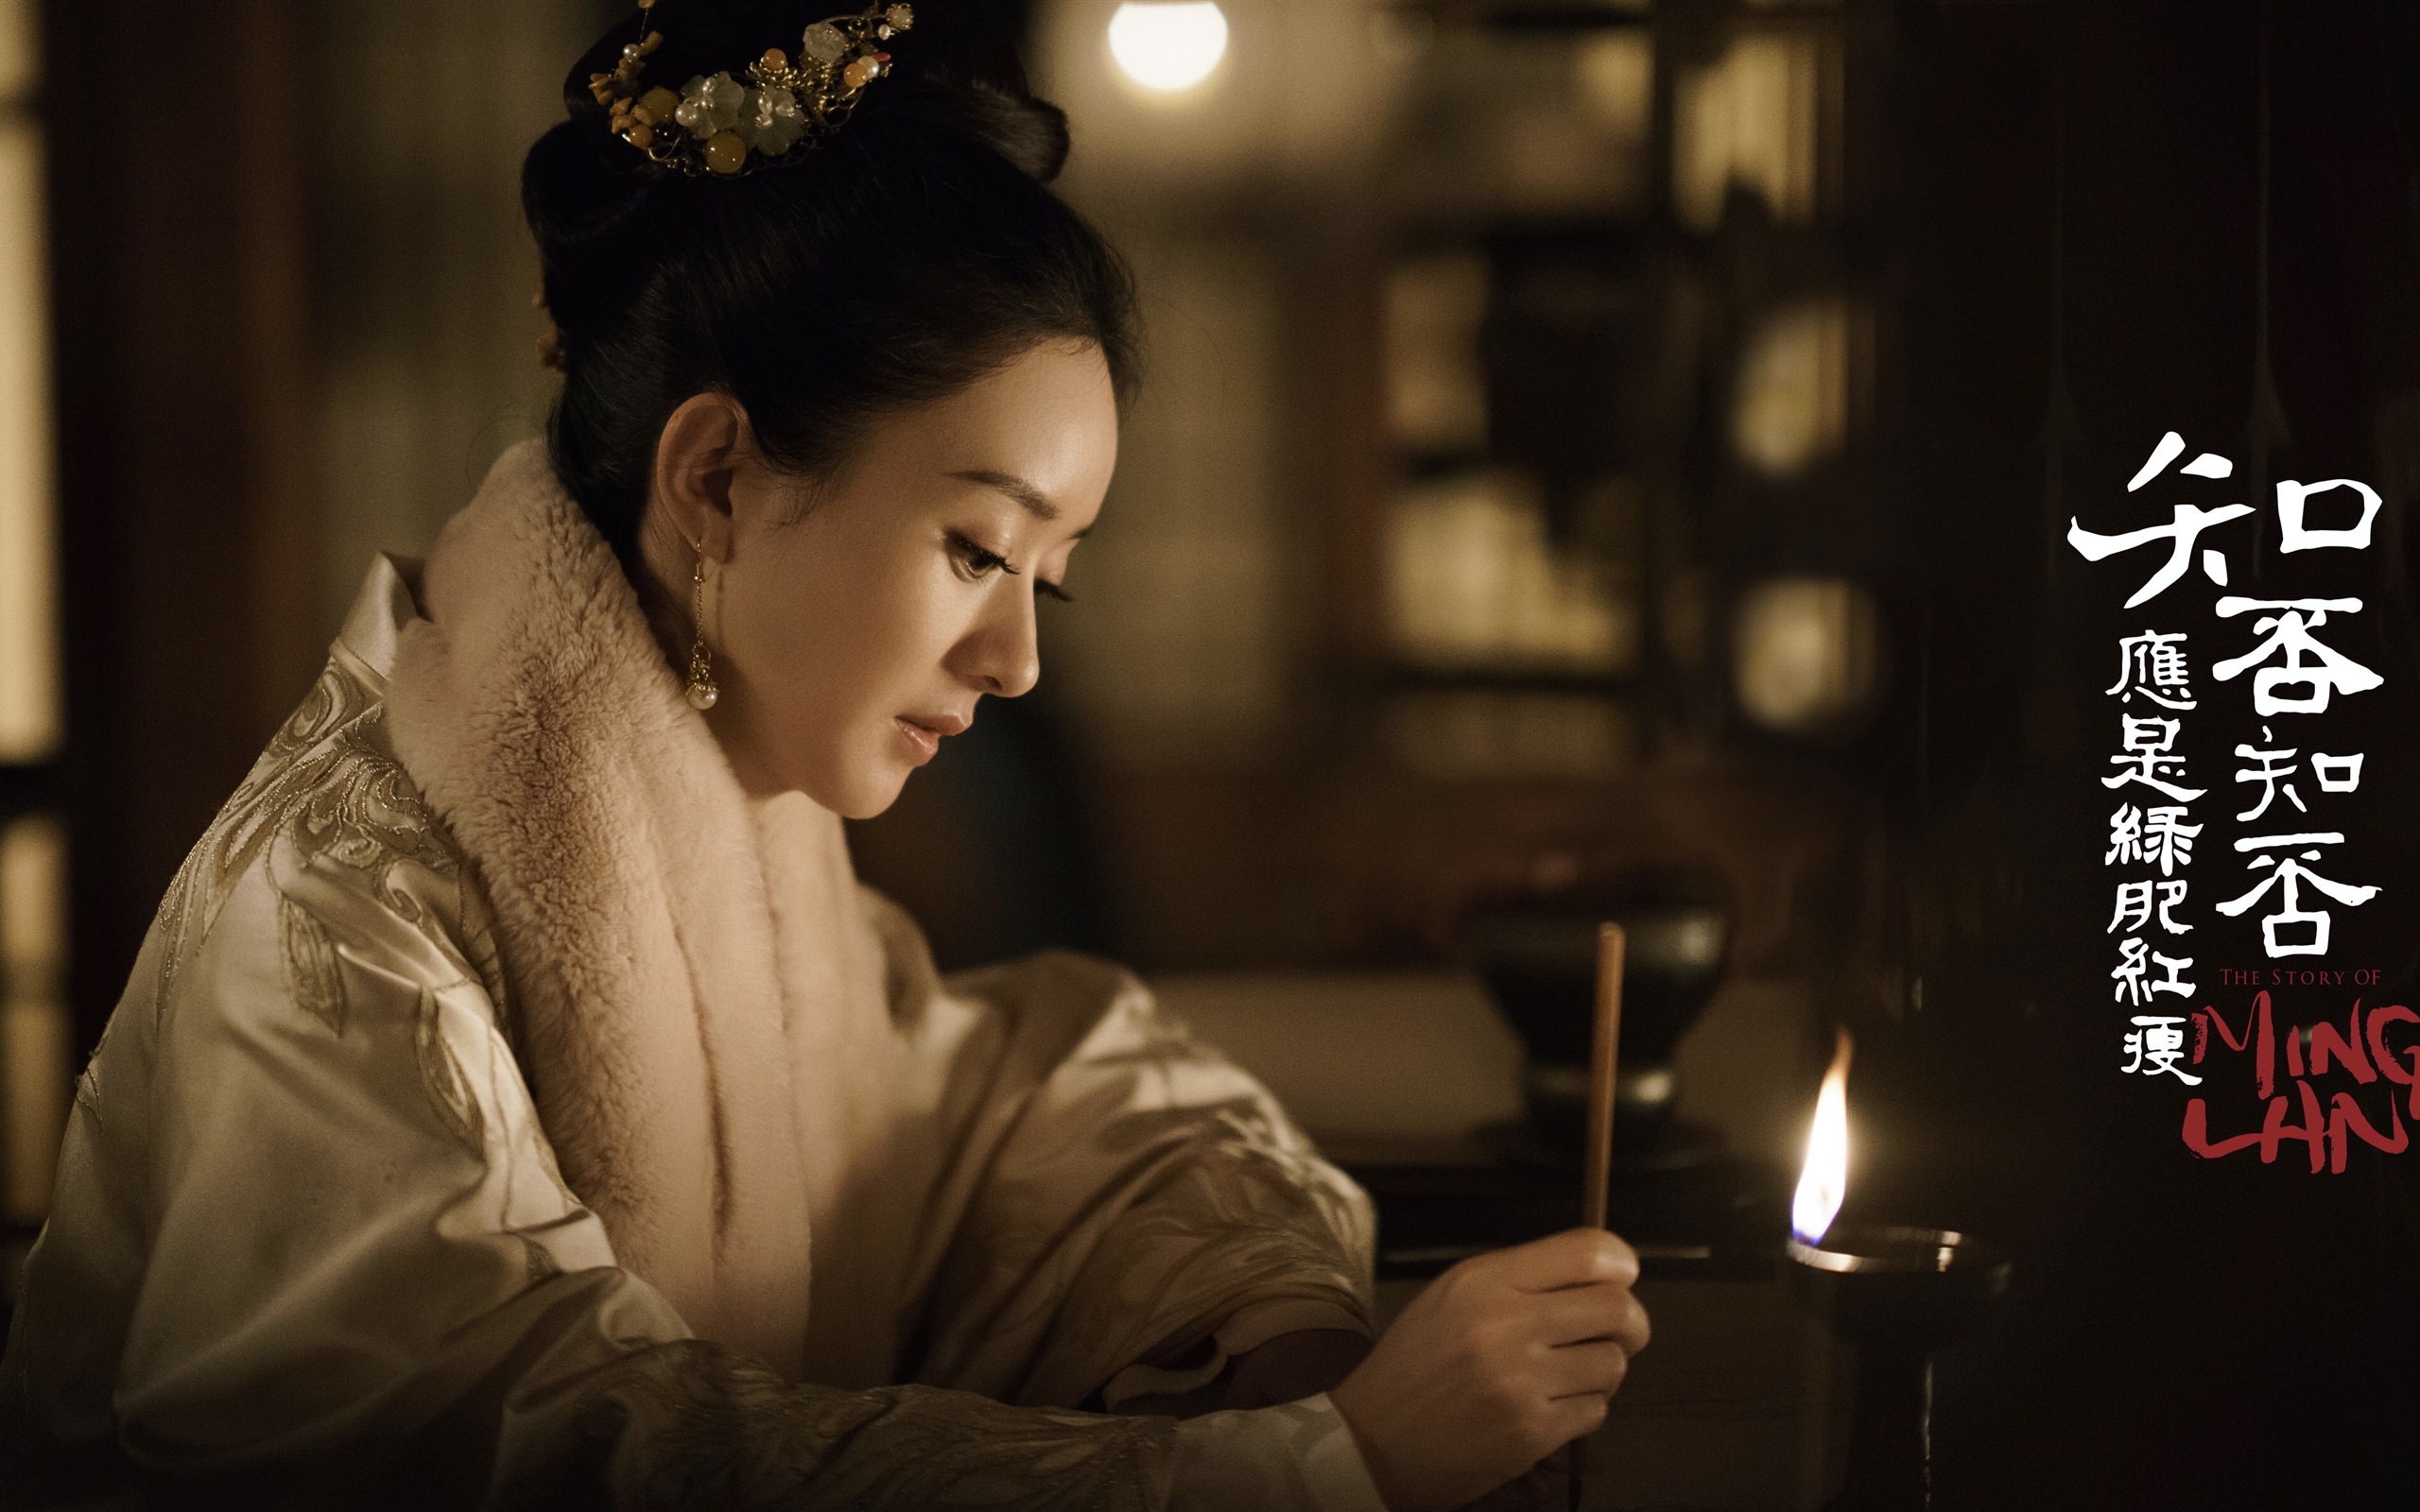 The Story Of MingLan, TV series HD wallpapers #26 - 2560x1600